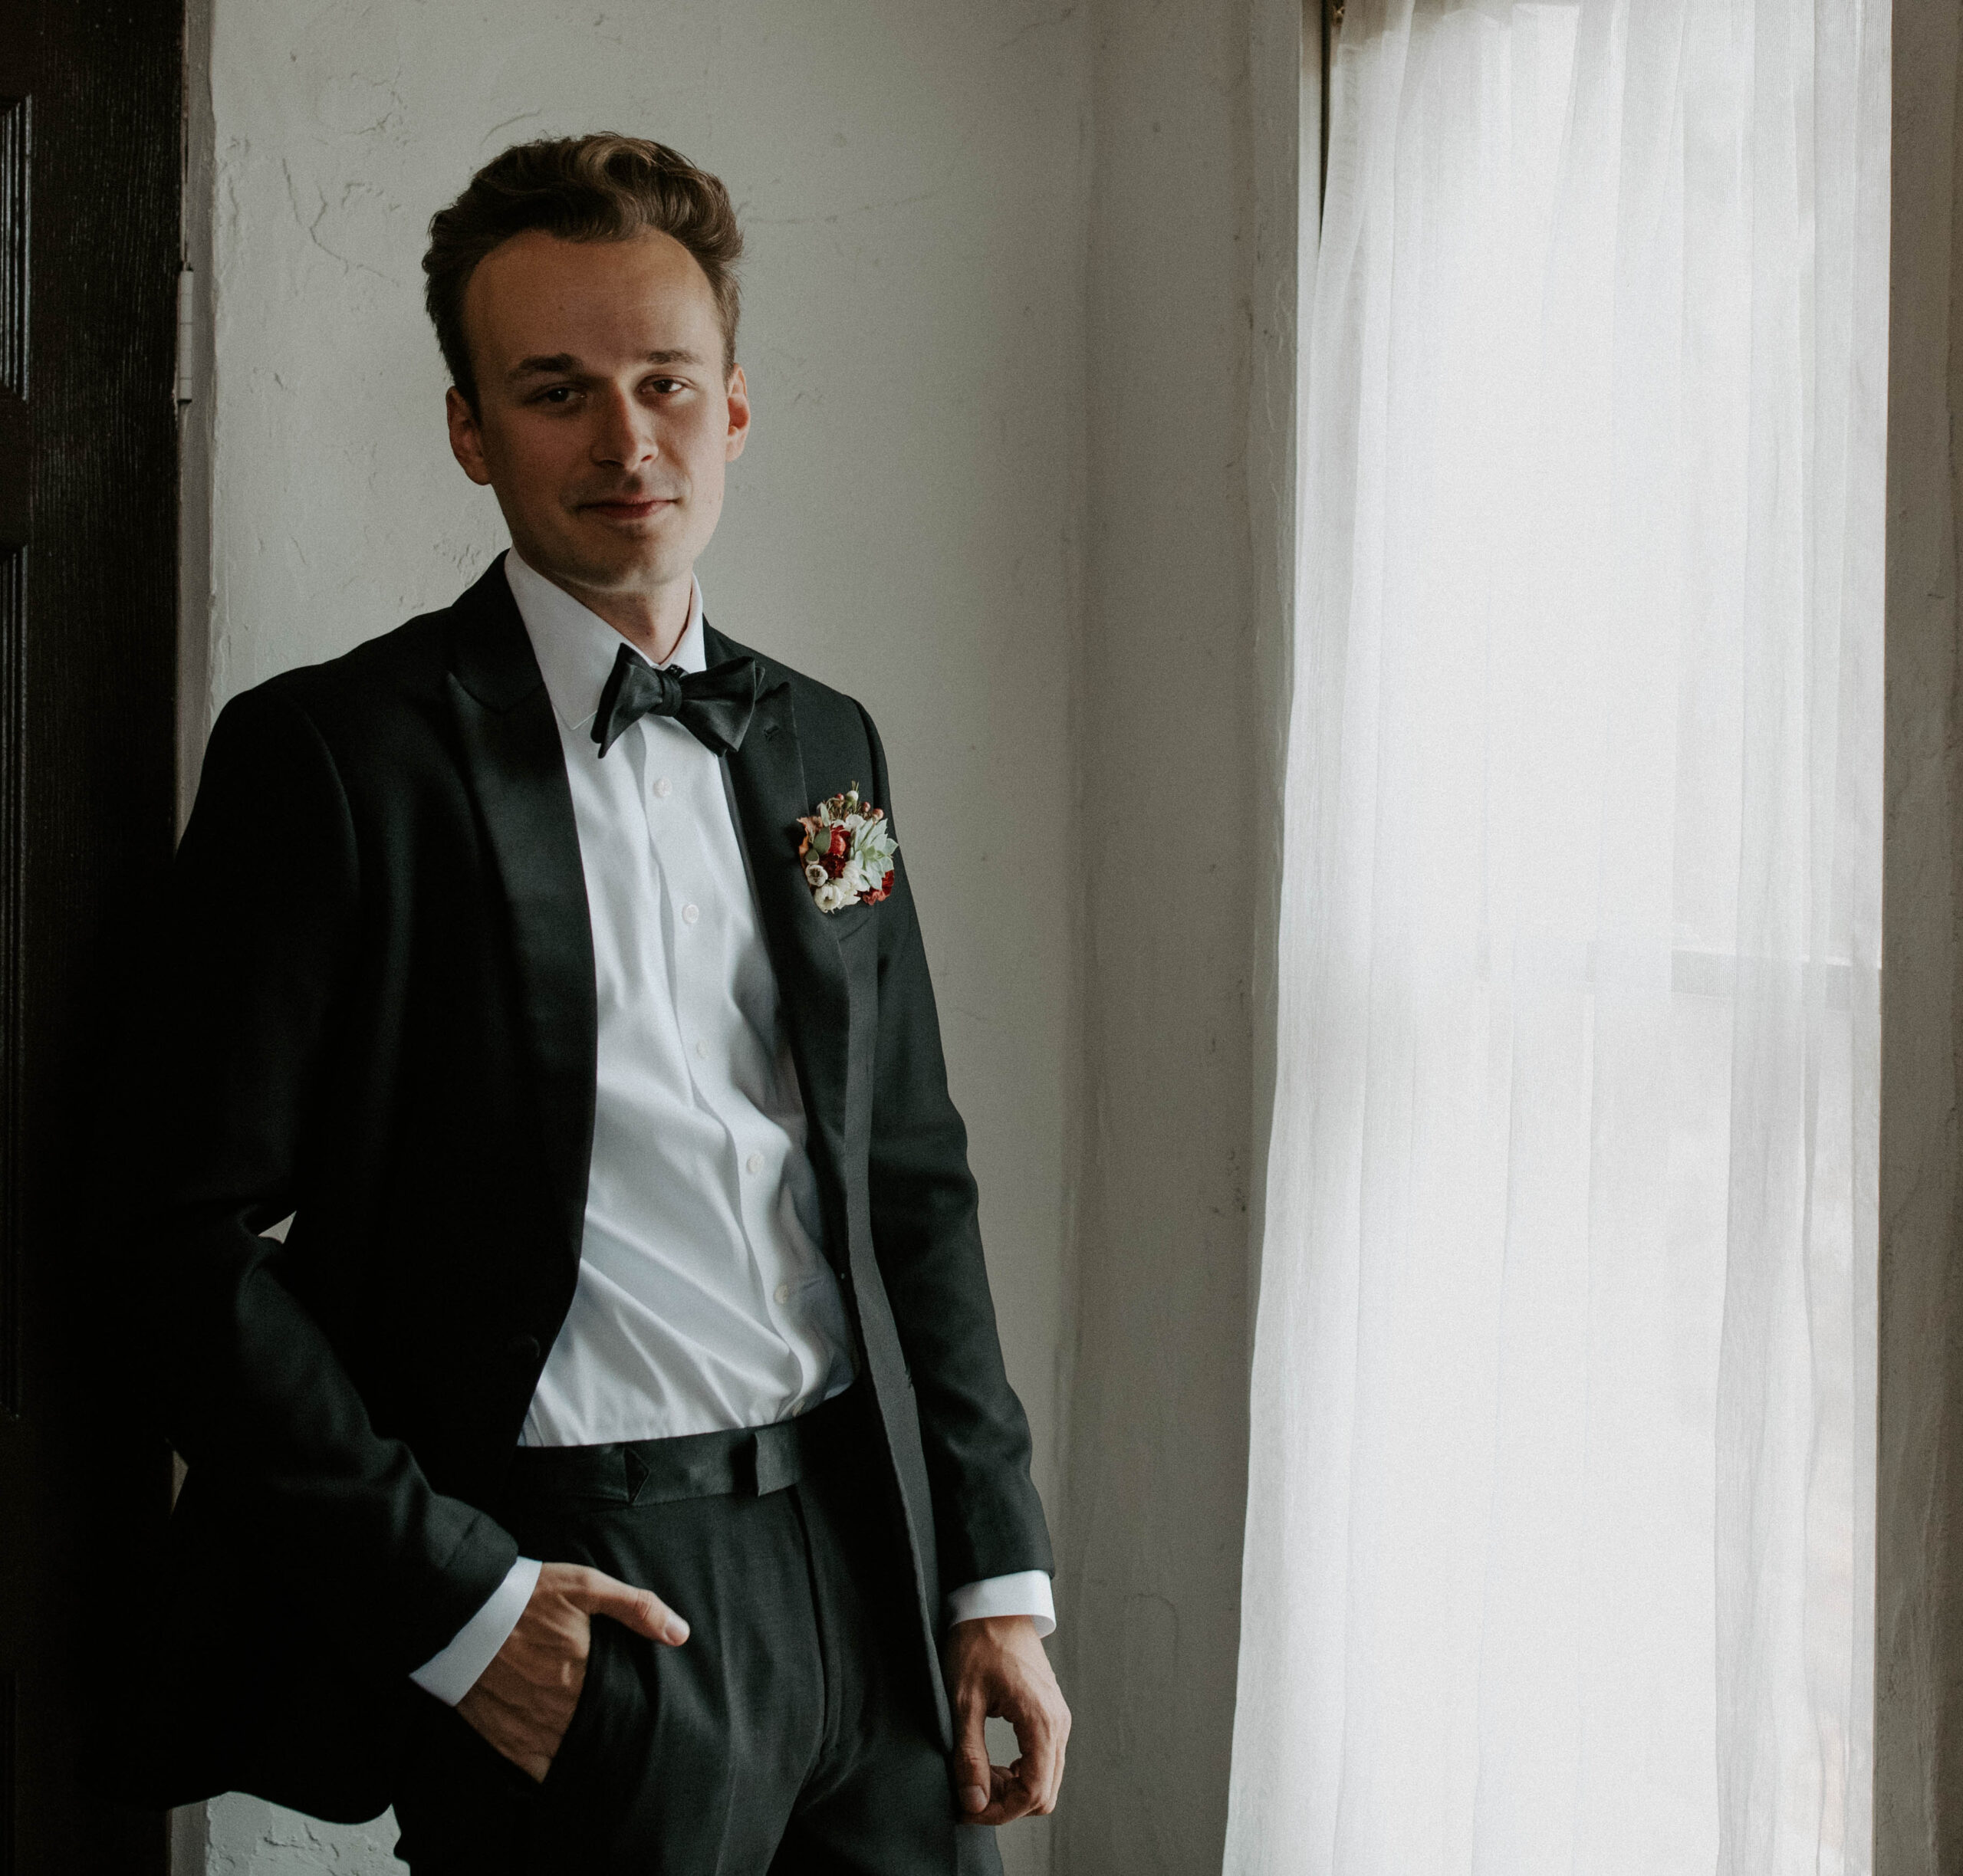 Black and white wedding photo of groom getting ready on his wedding day. The groom is wearing a classic black suit, white shirt and black bowtie.